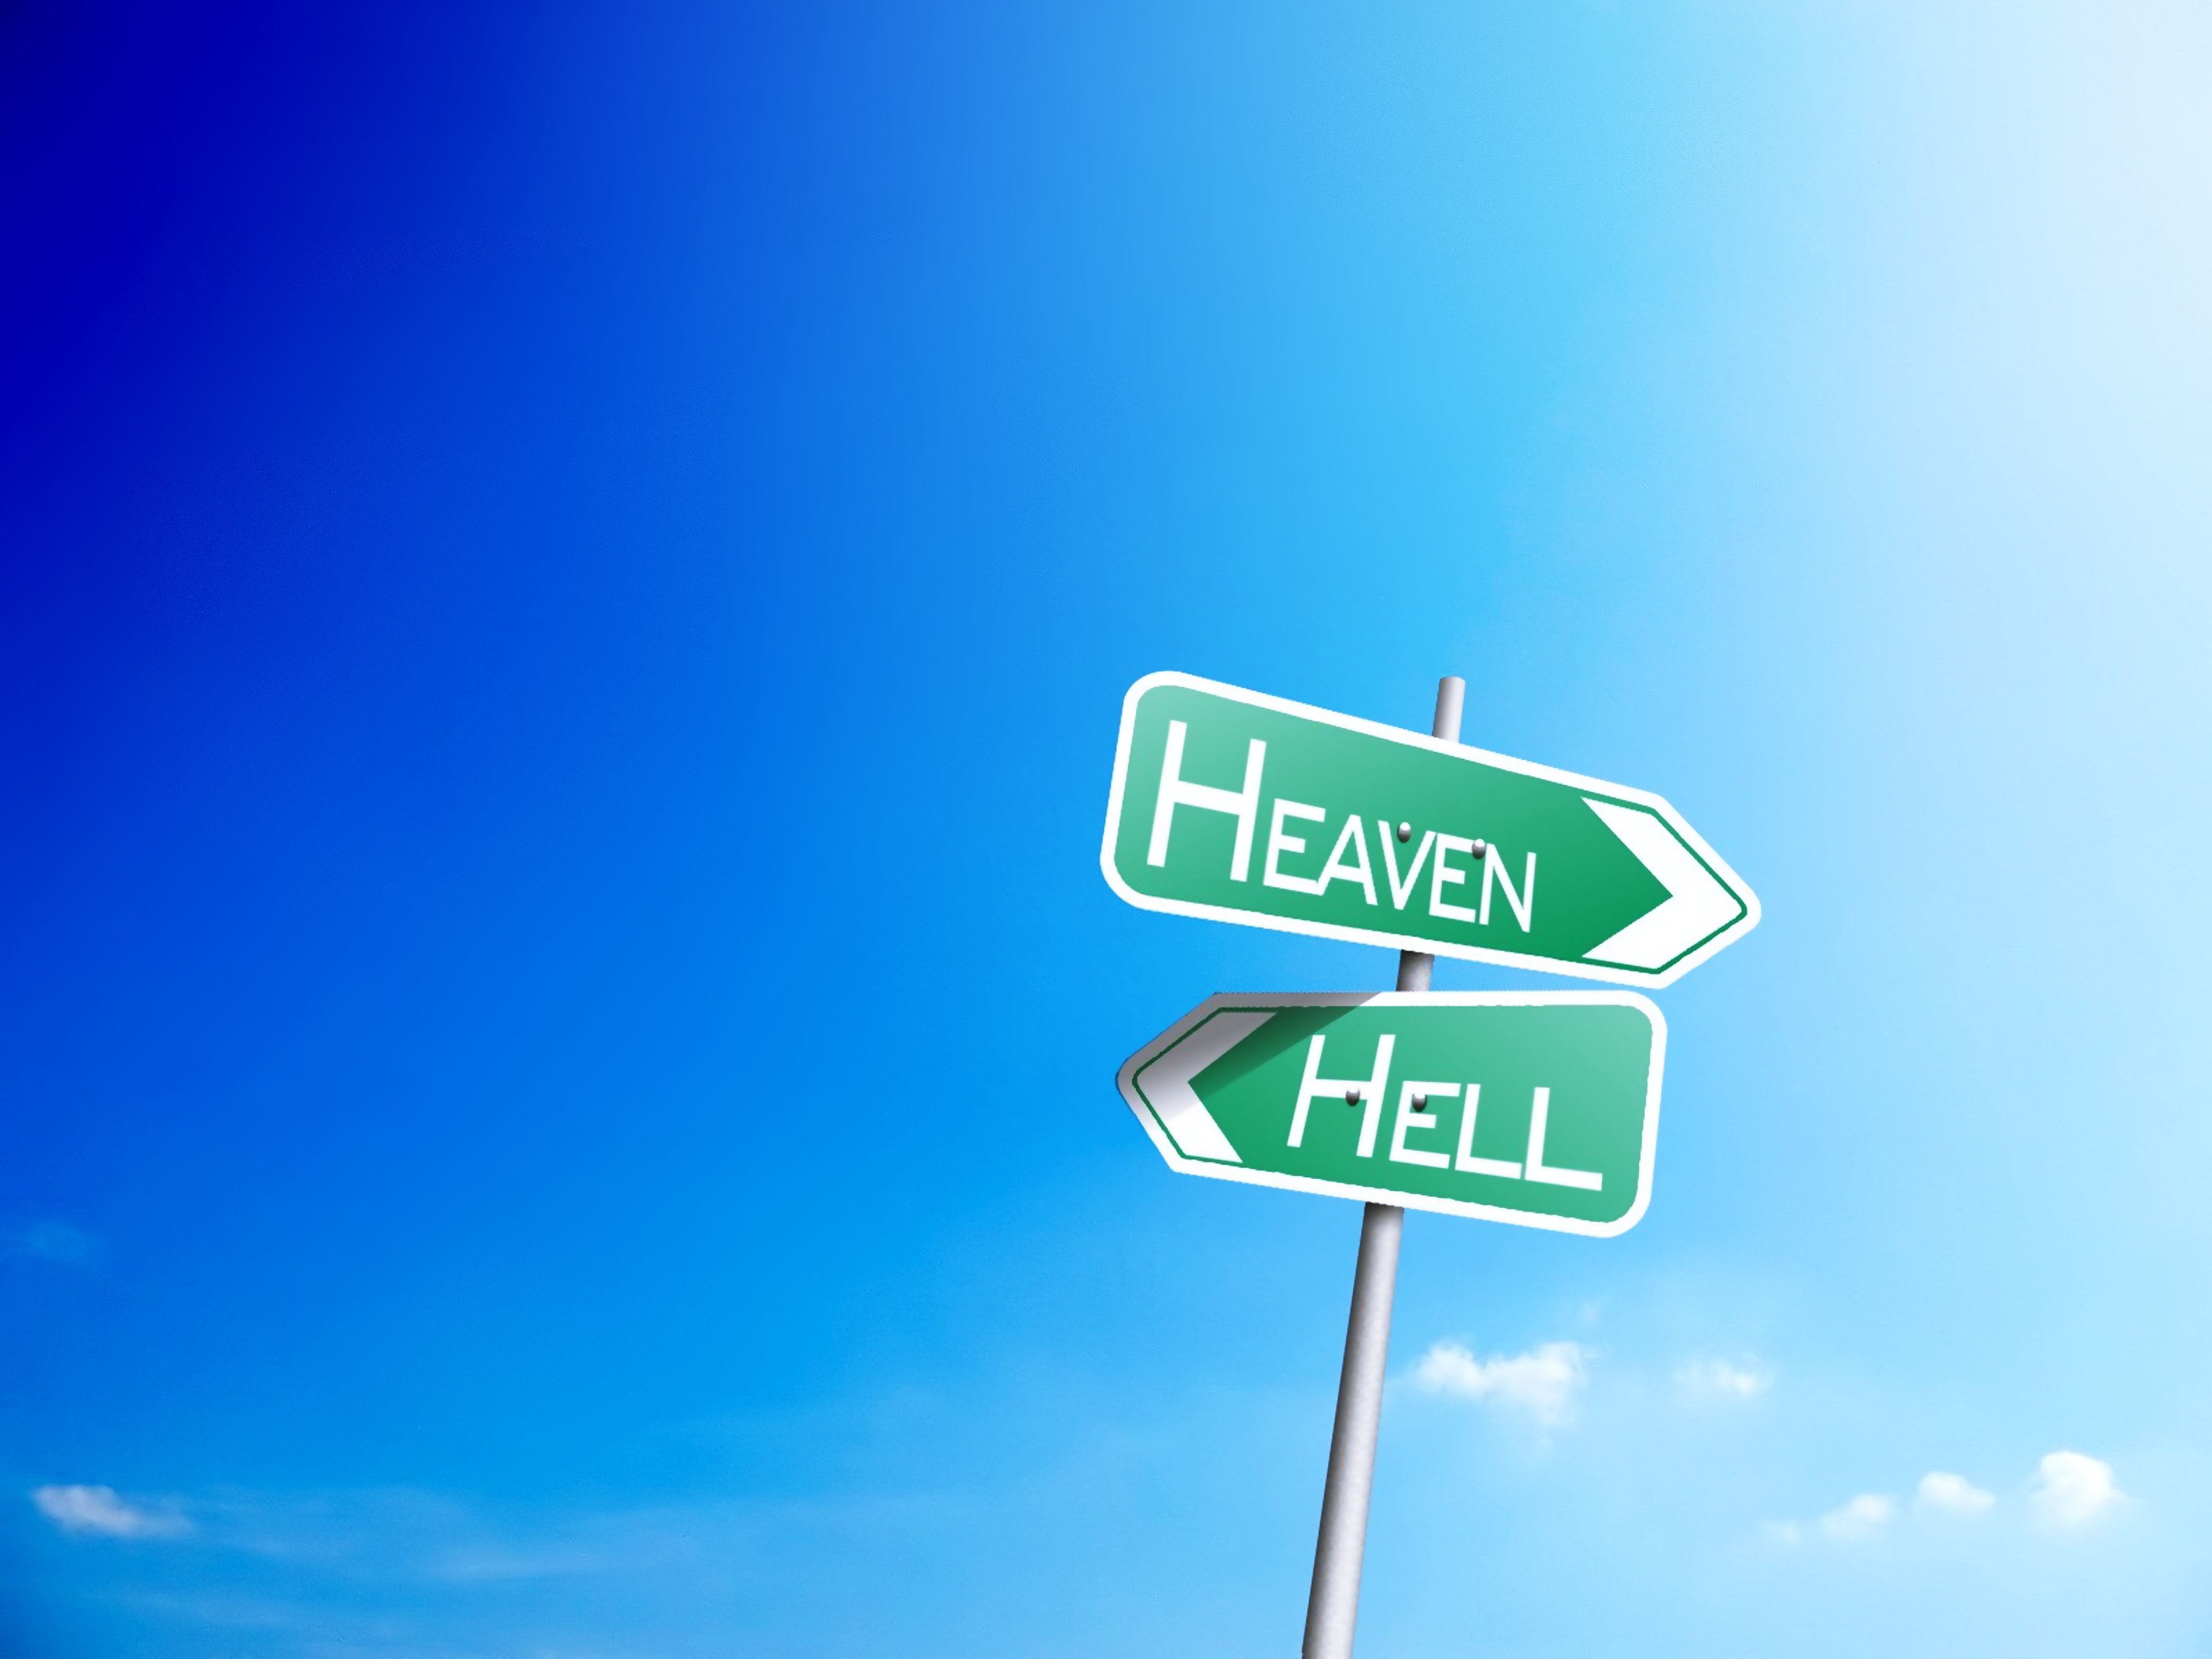 religion, Facts, Ways, Paths, Sky, Chose, One, Winer, Loser, Heaven, Hell Wallpaper